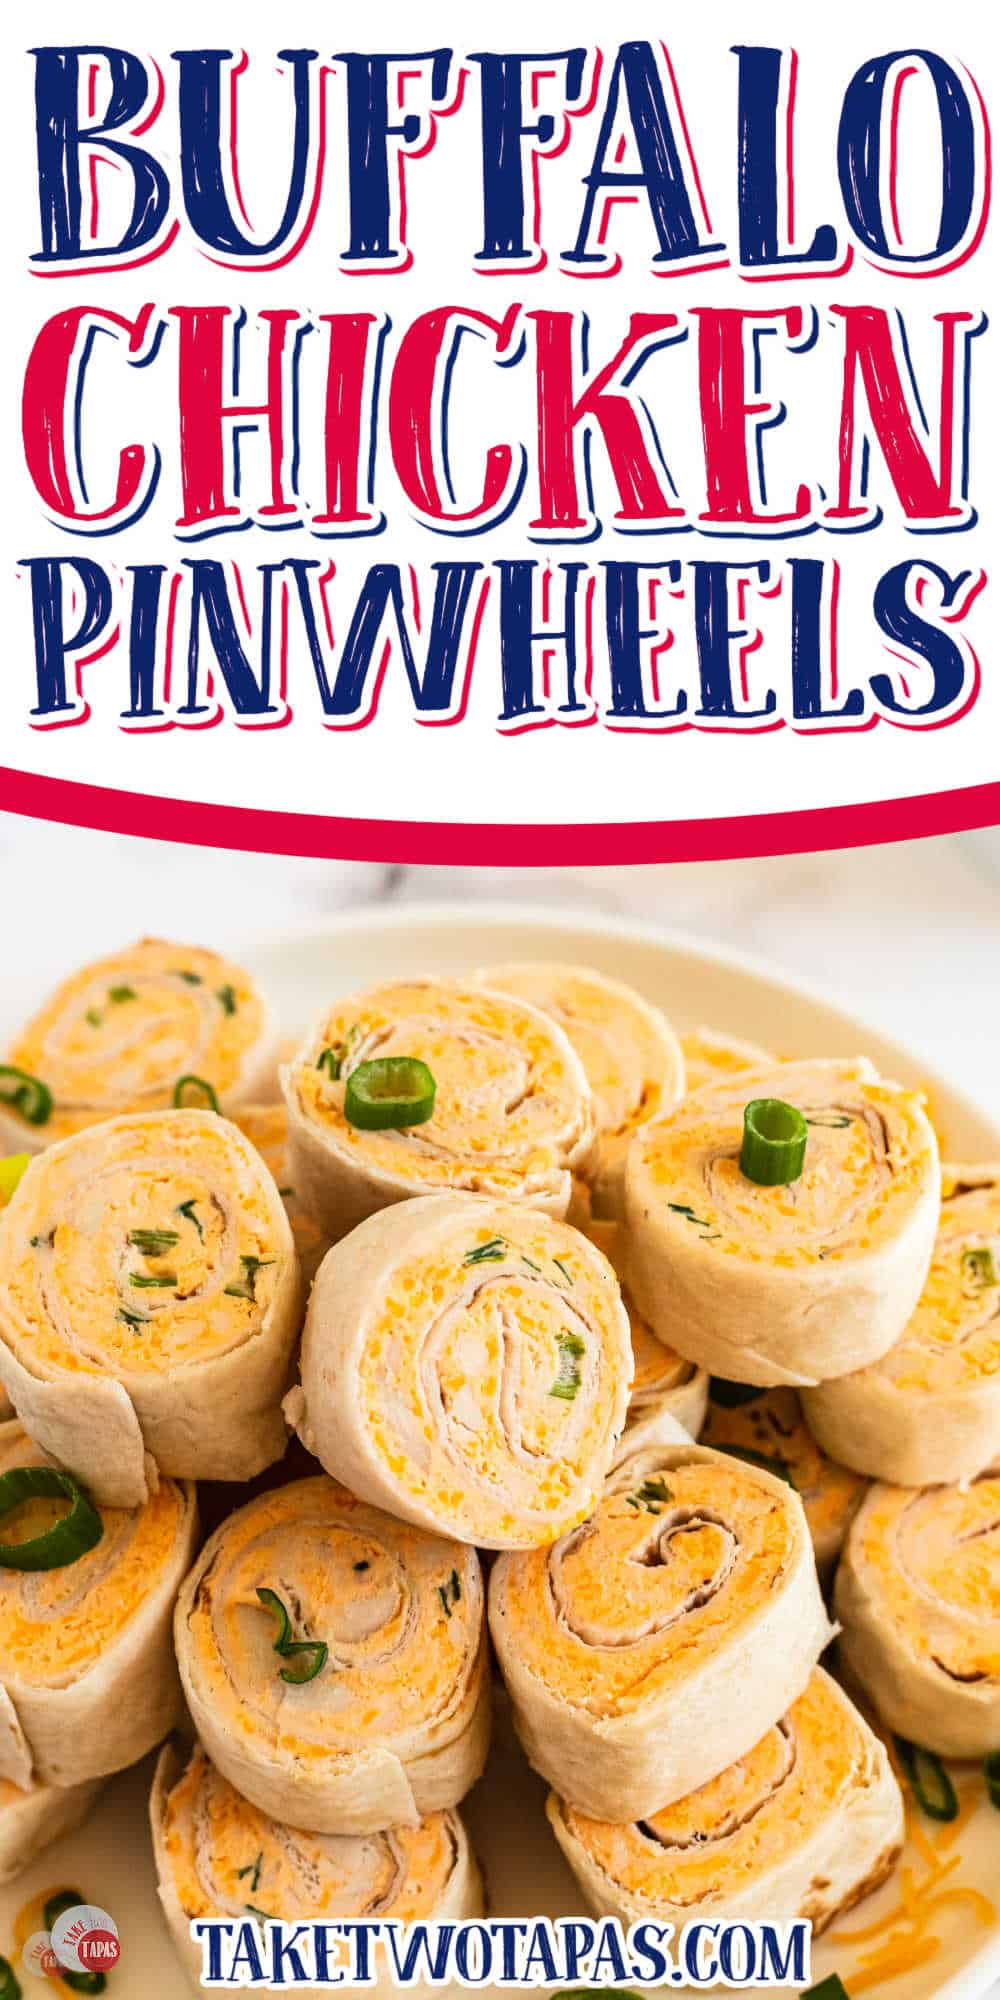 stack of pinwheel sandwiches with text "buffalo chicken"